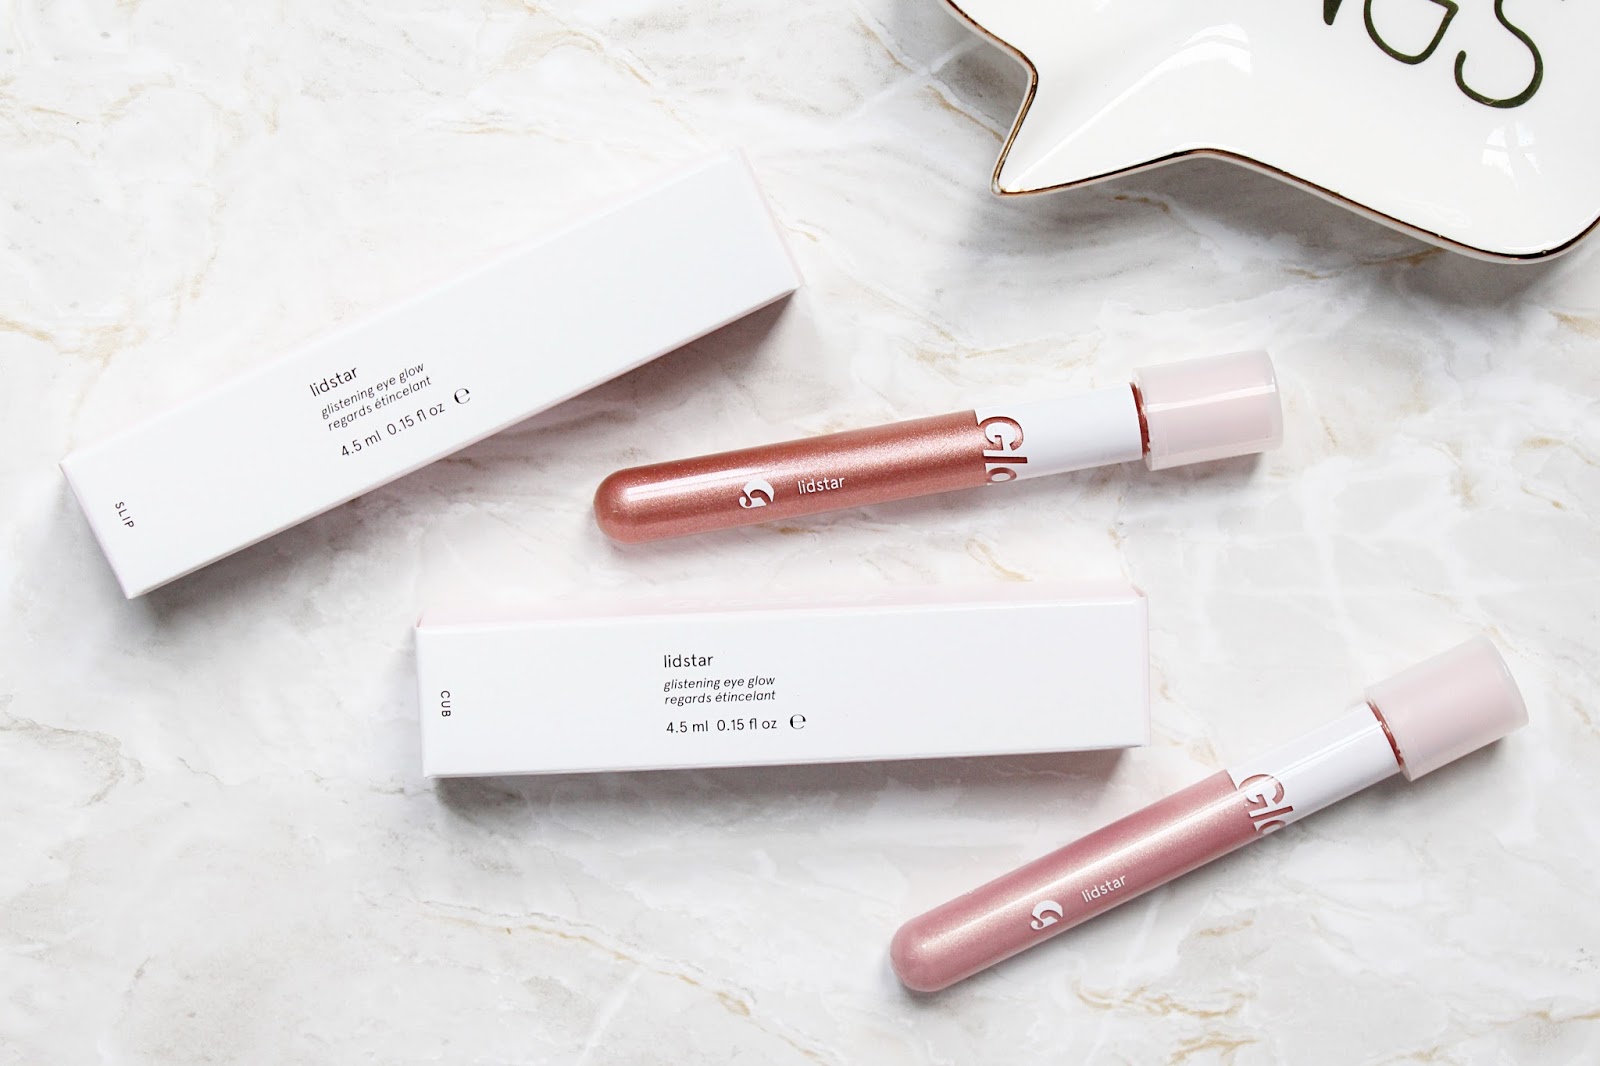 Glossier Lidstars Reviewed & Swatched